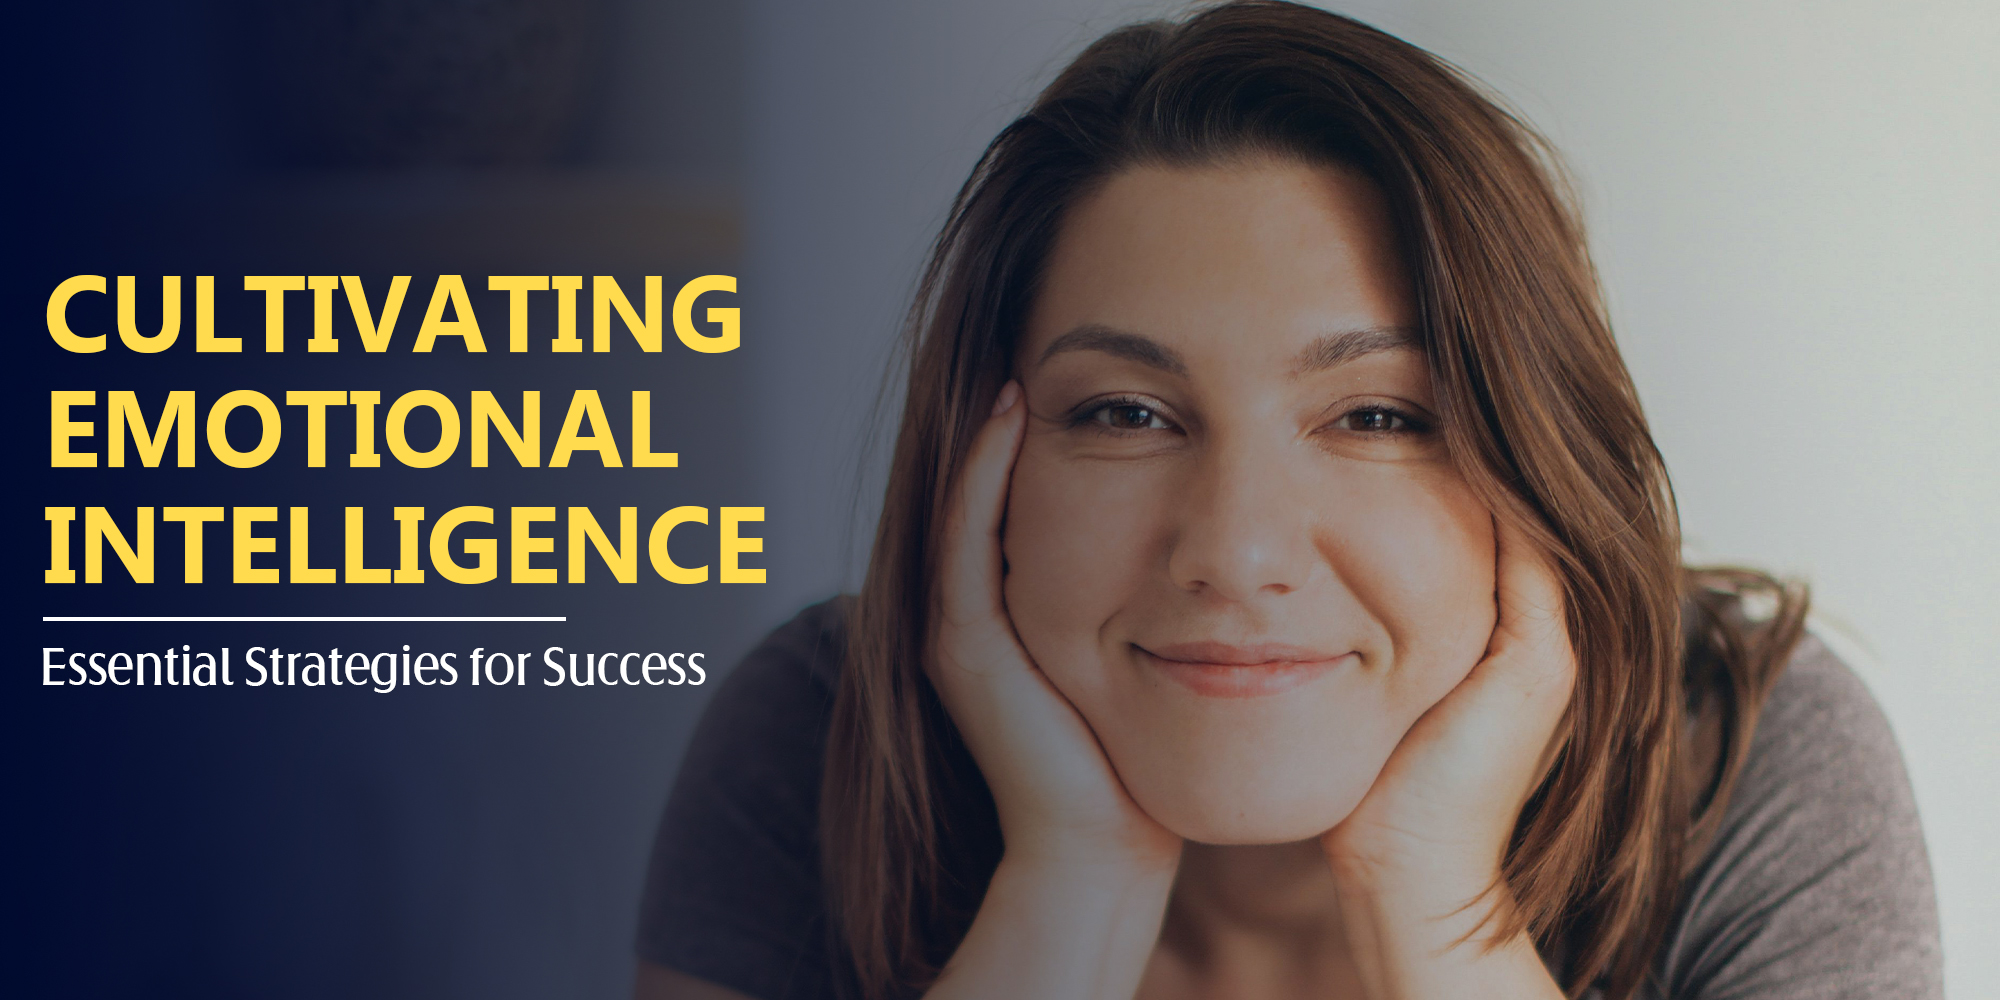 Cultivating Emotional Intelligence: Essential Strategies for Success